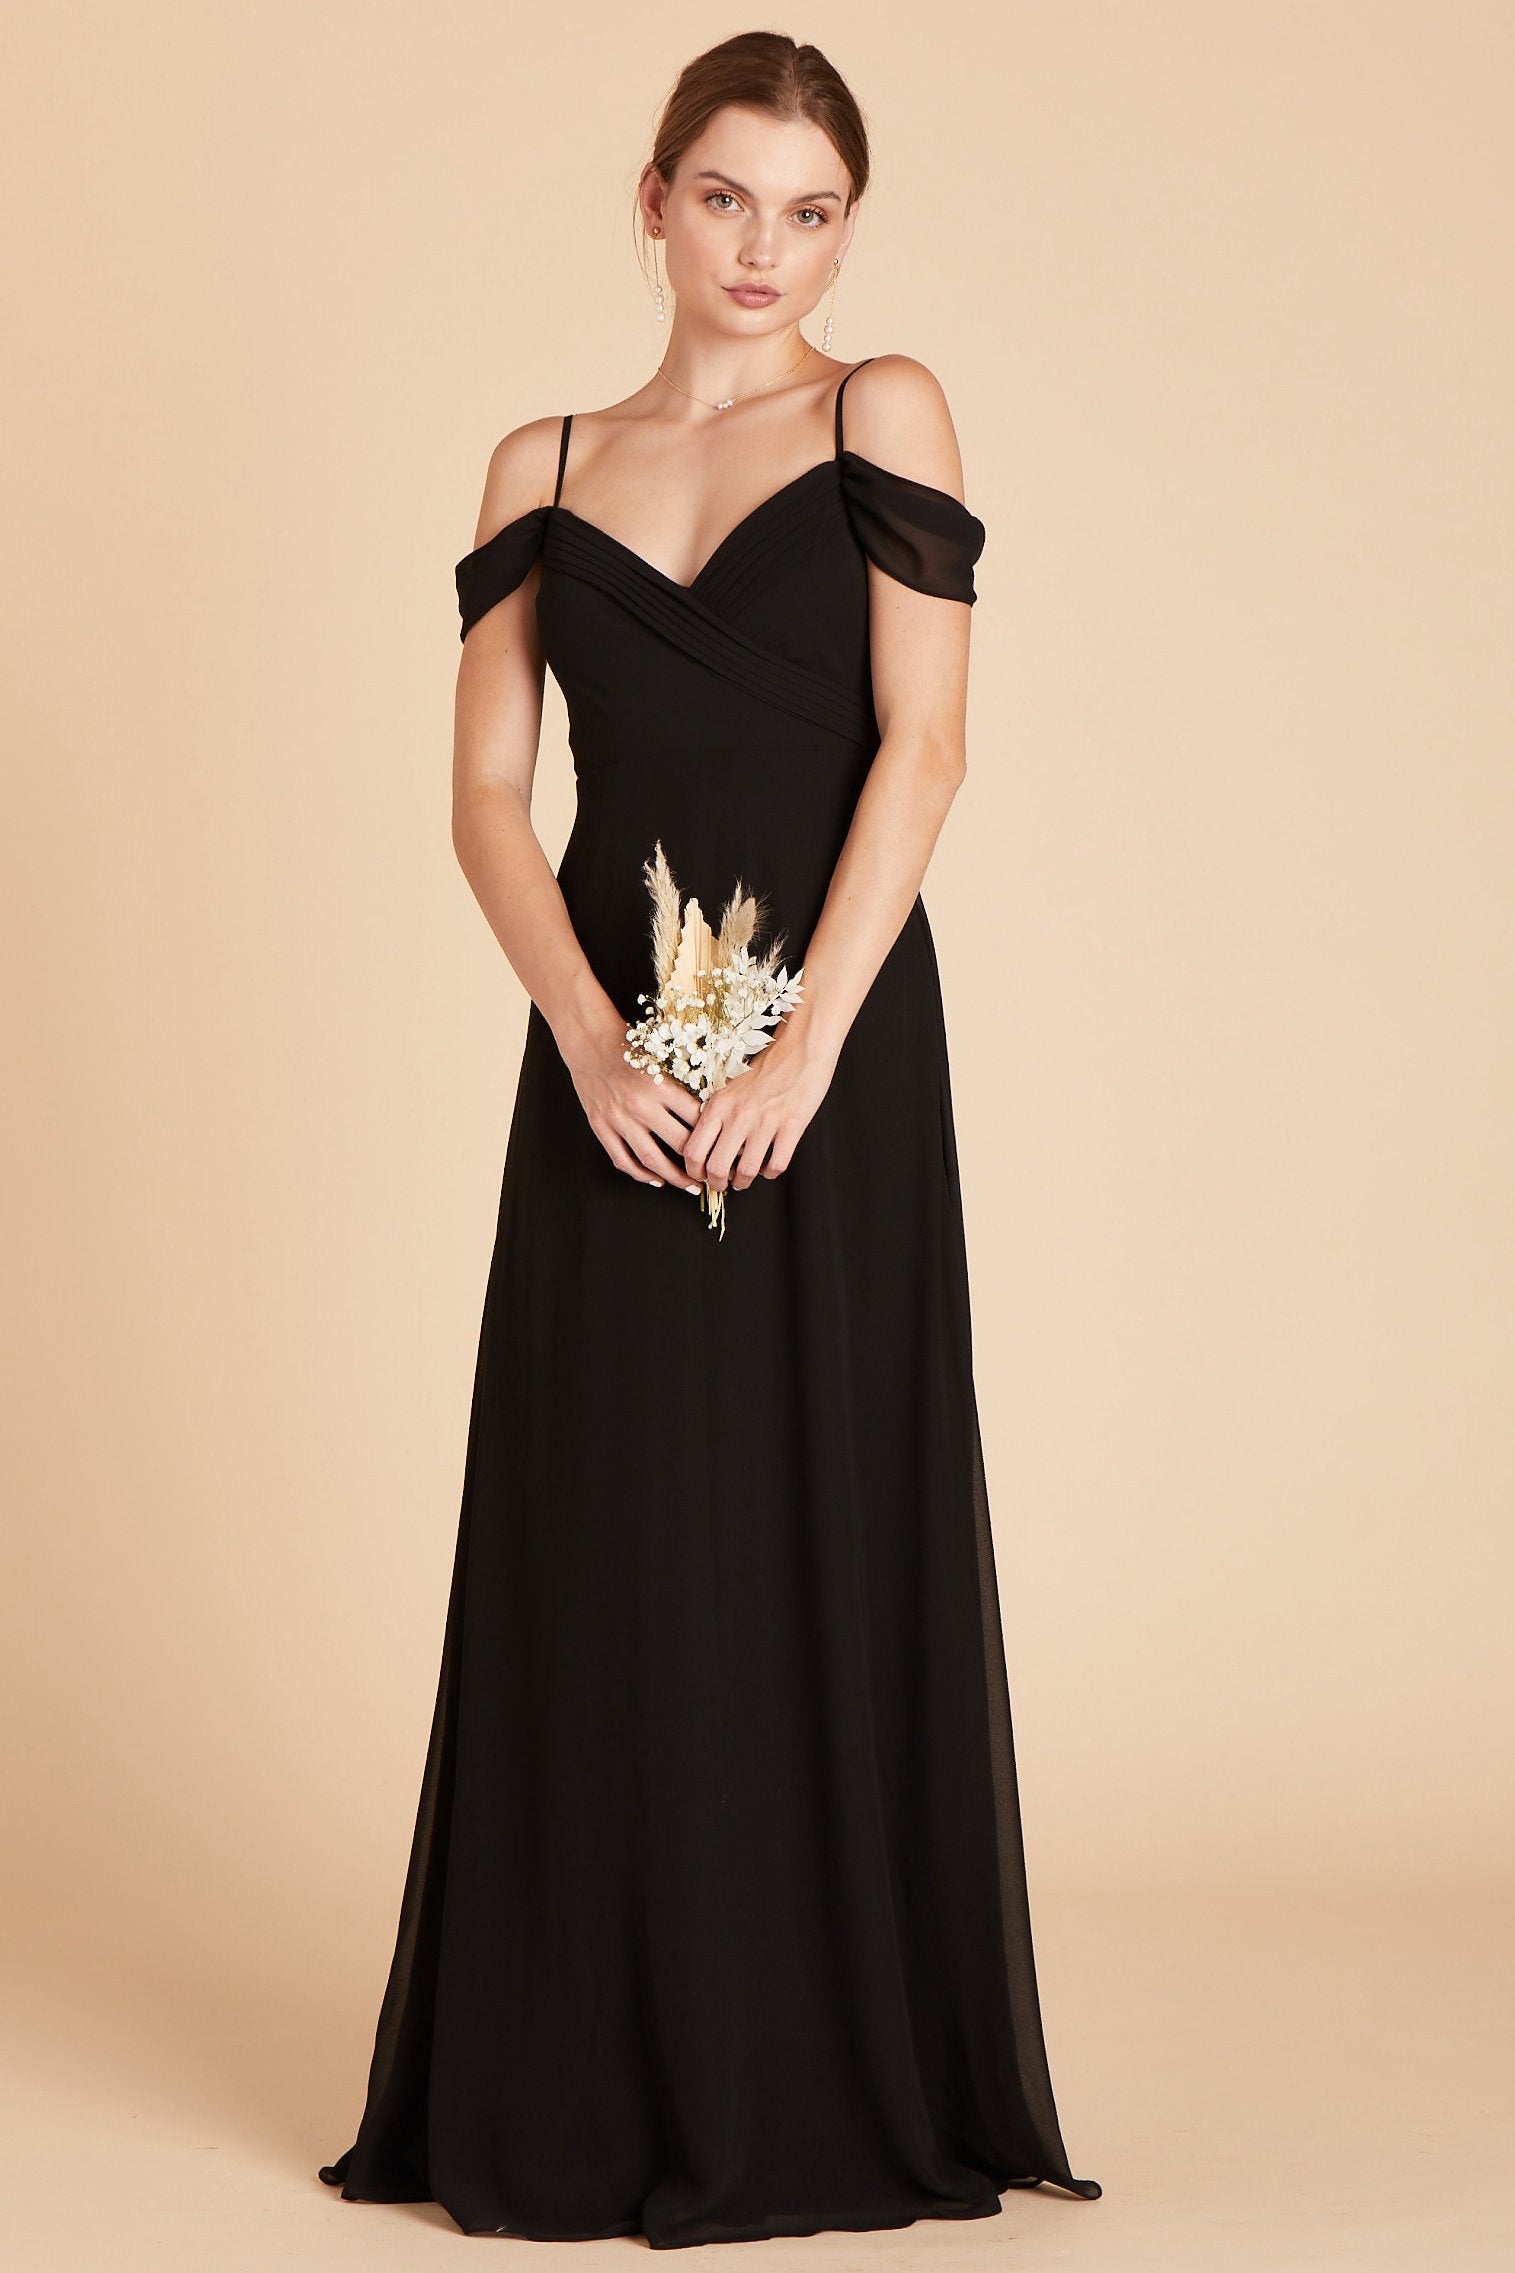 Spence convertible bridesmaid dress in black chiffon by Birdy Grey, front view